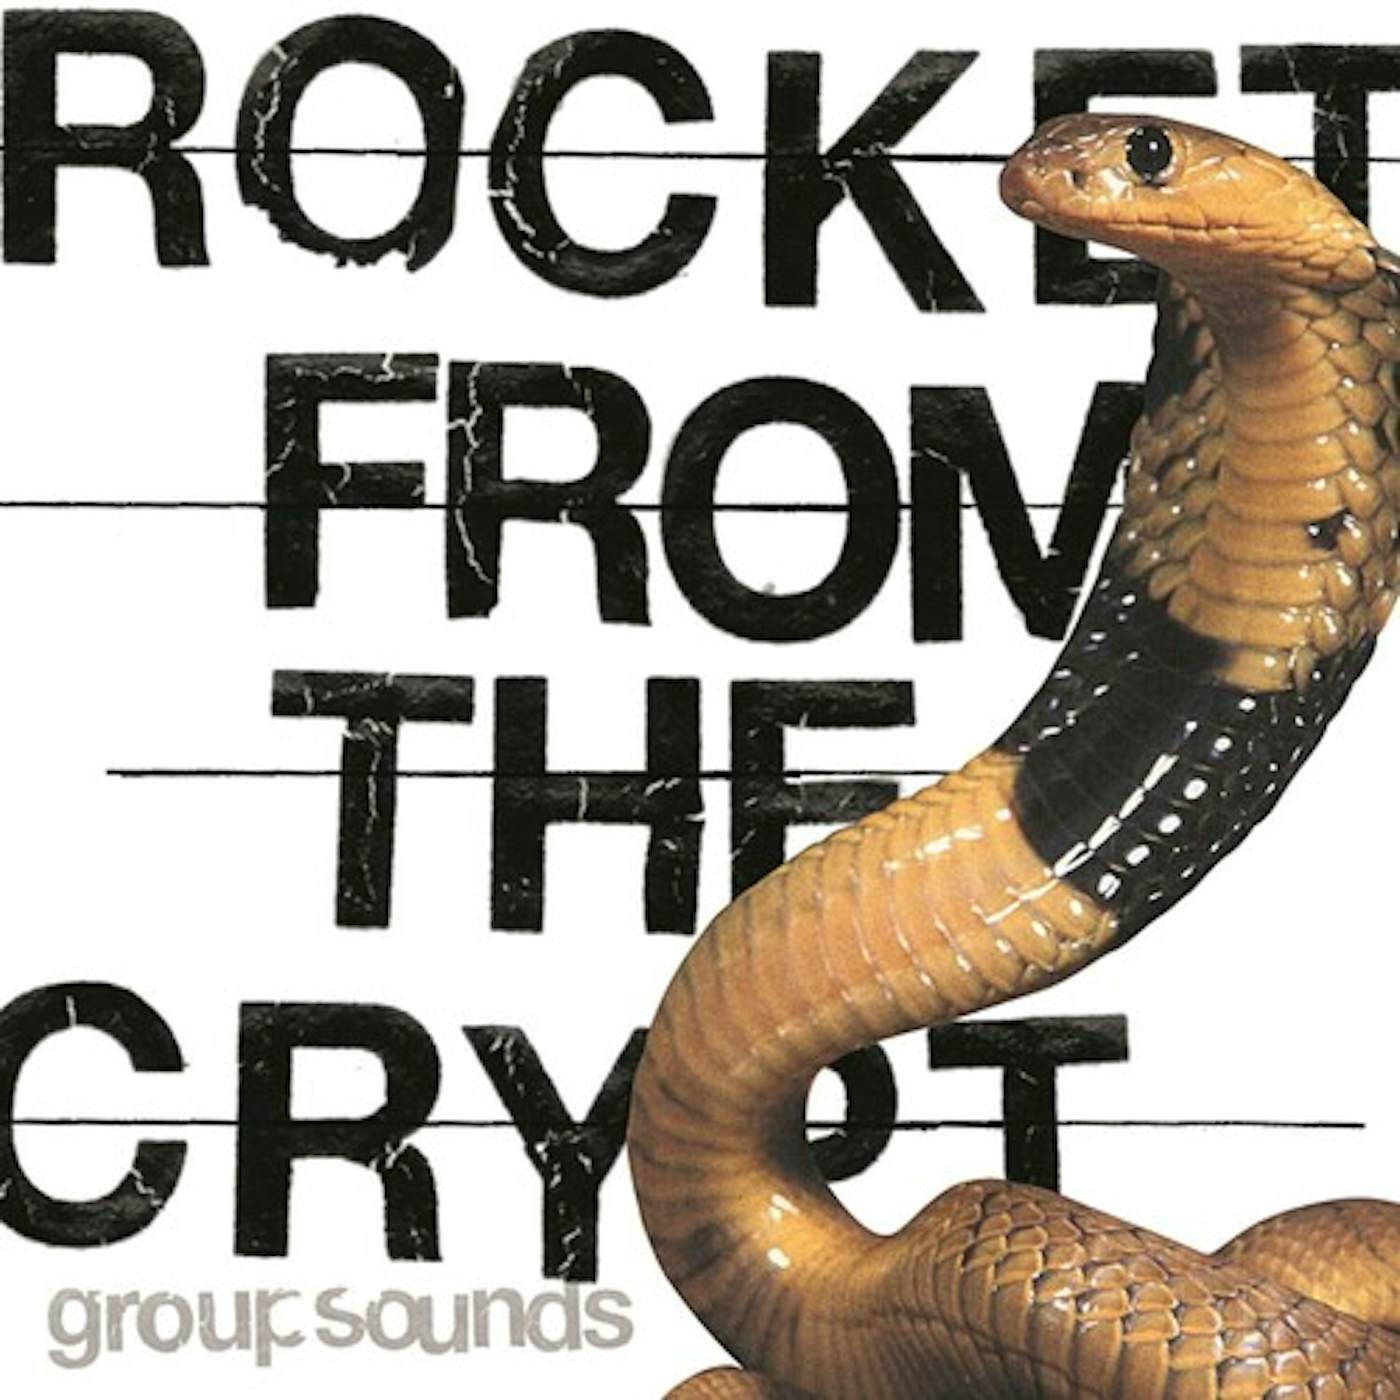 Rocket From The Crypt Group Sounds Vinyl Record